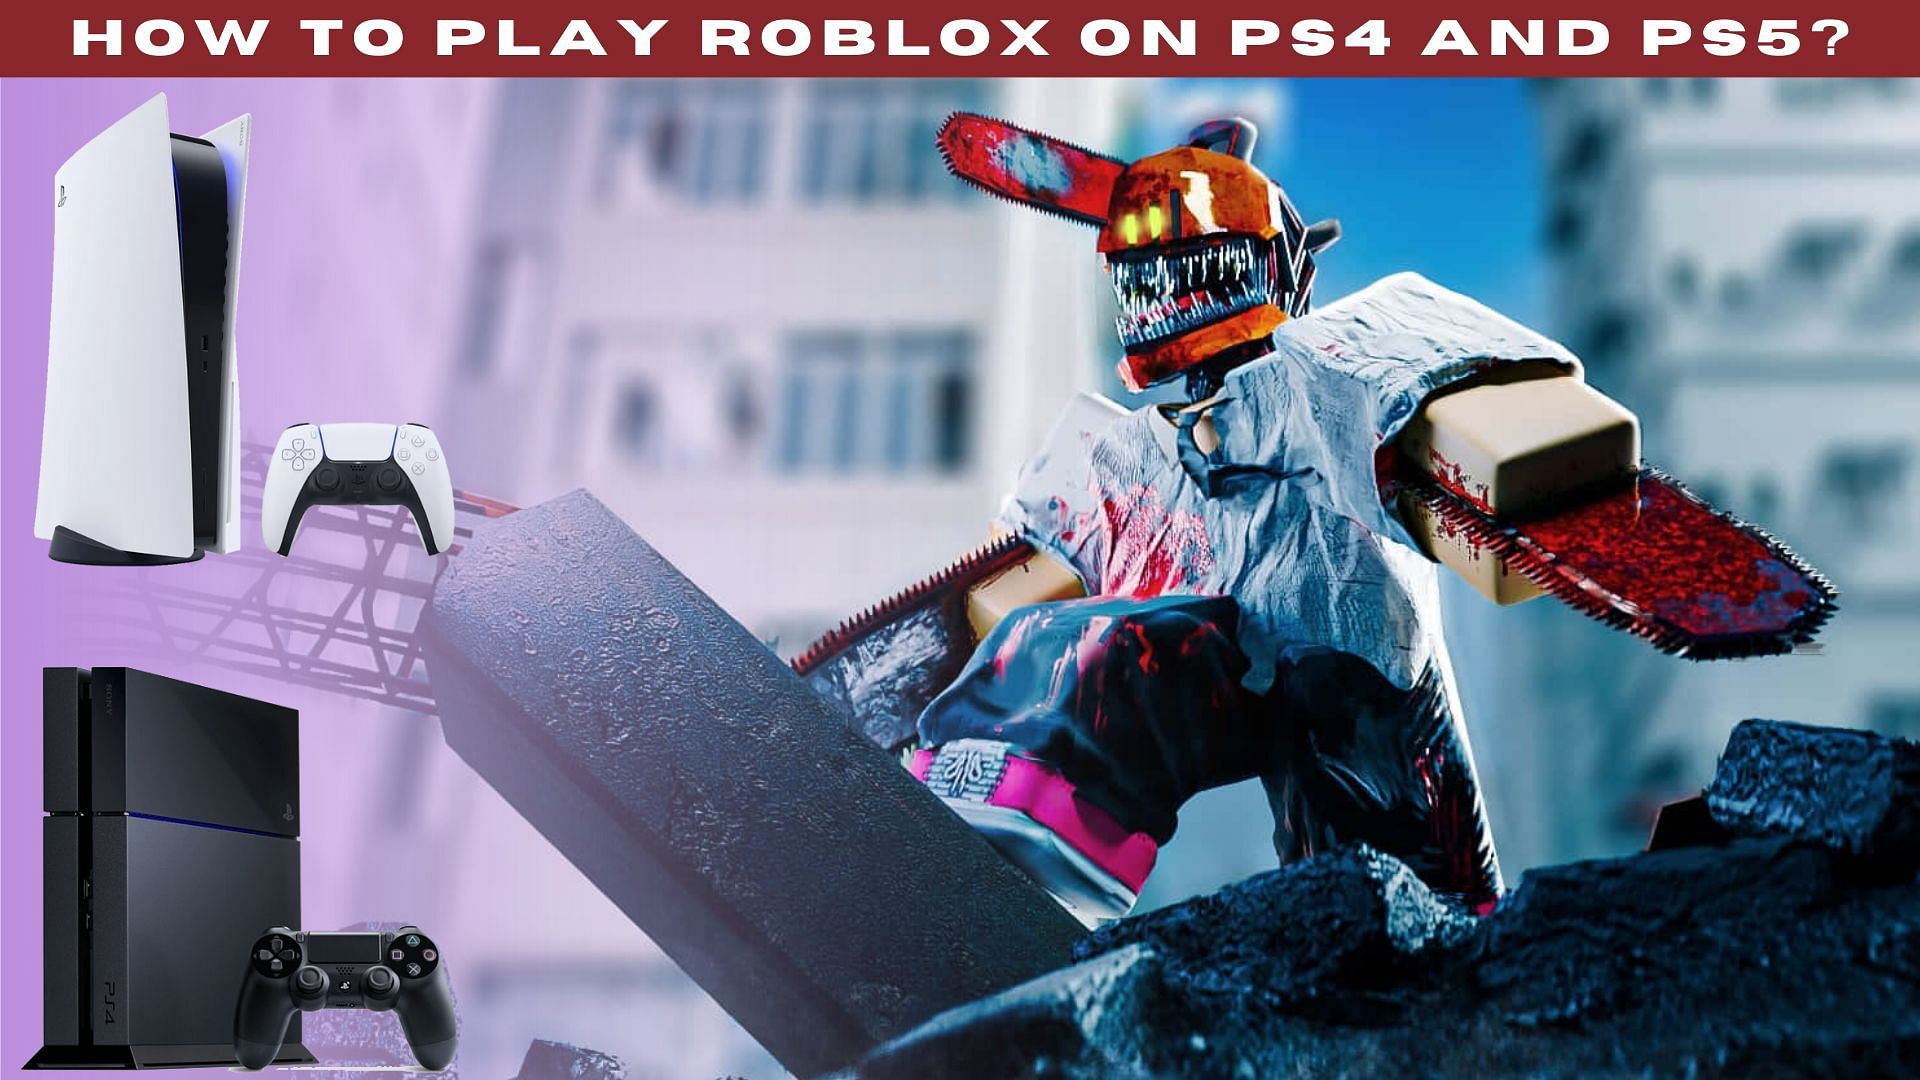 Will roblox require ps plus : r/playstation